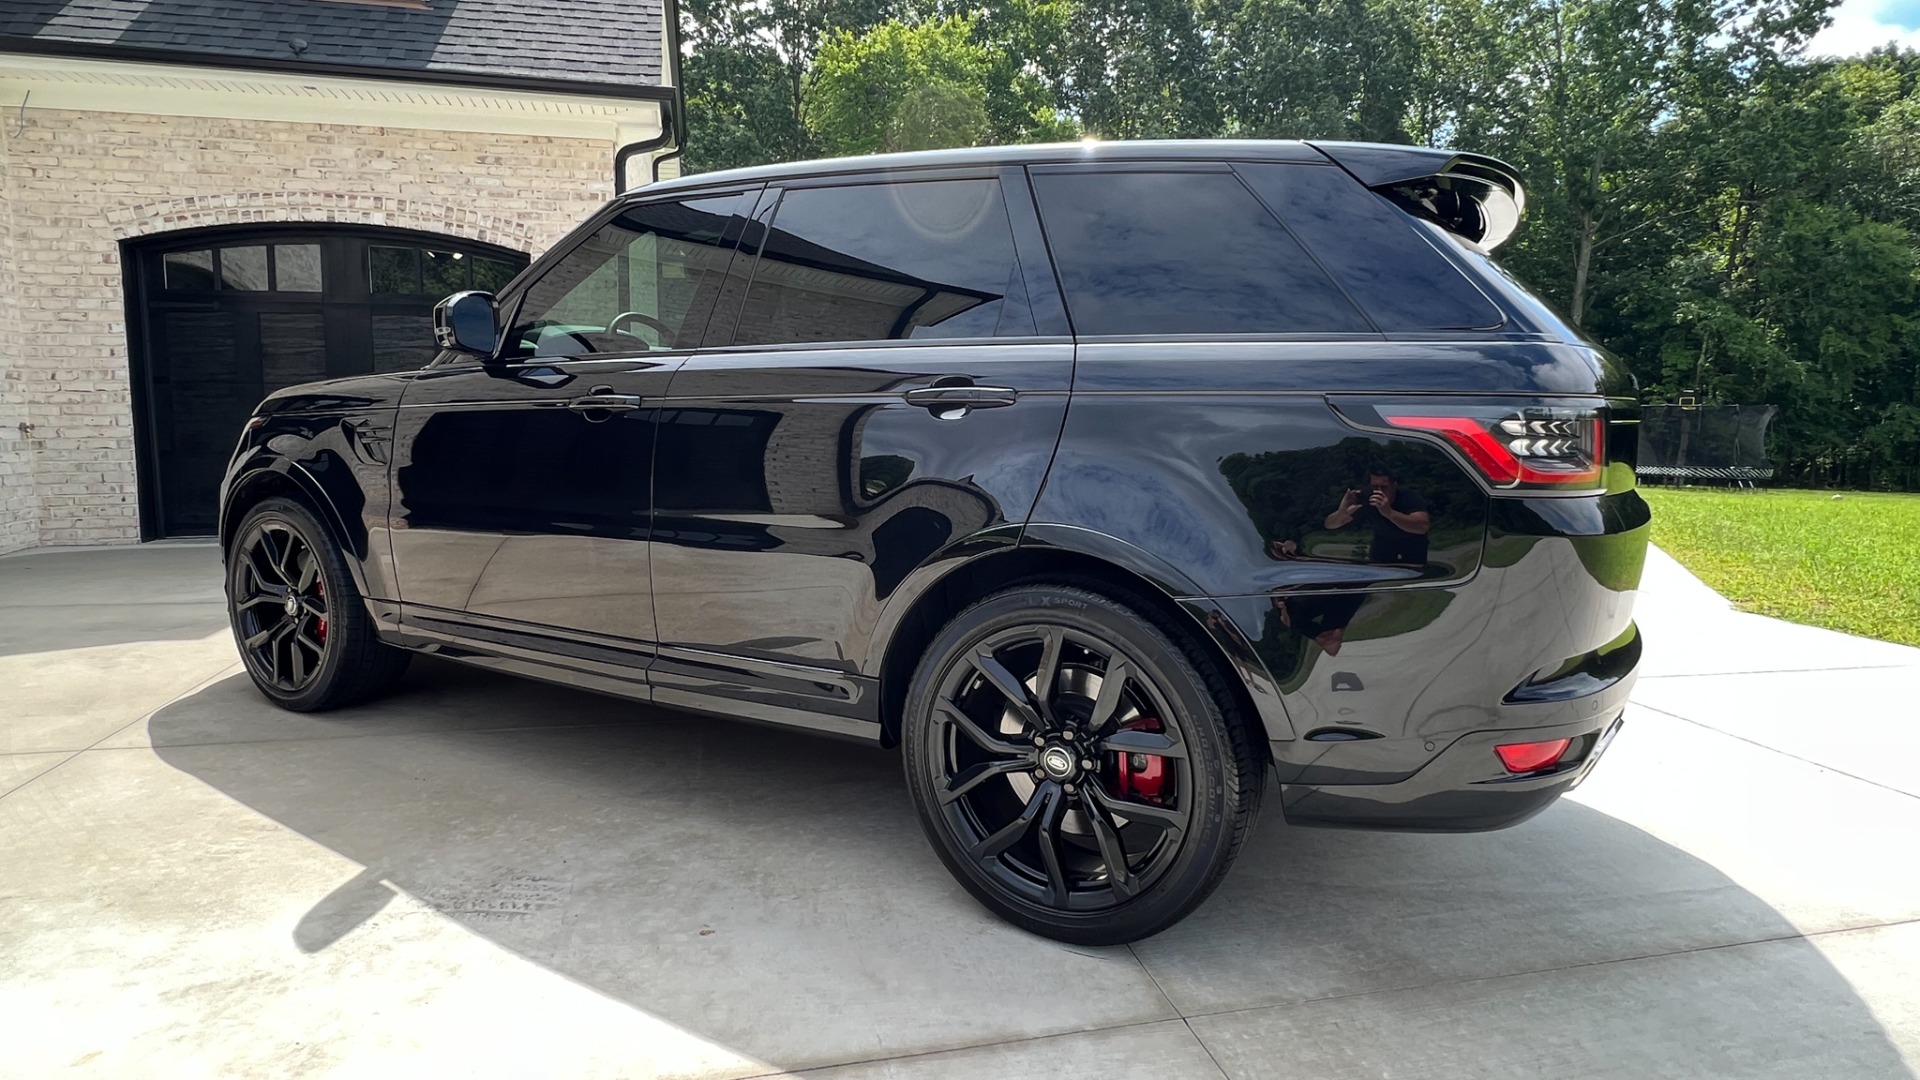 Used 2018 Land Rover Range Rover Sport SVR / 22IN WHEELS / DRIVE PRO / TOW PACK / MERIDIAN SOUN for sale $105,995 at Formula Imports in Charlotte NC 28227 5